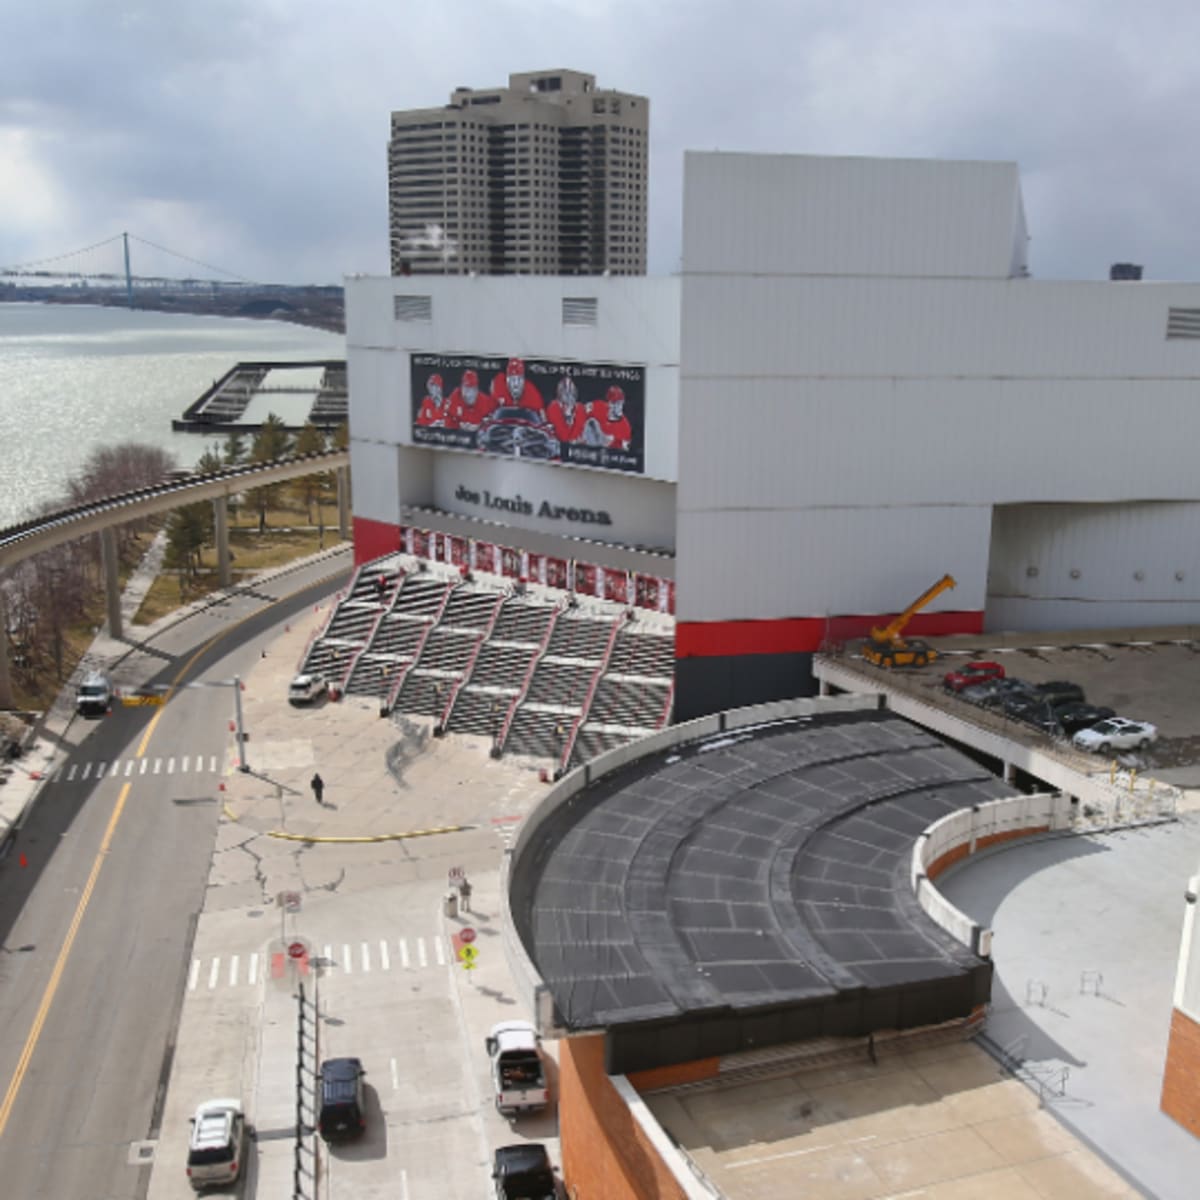 Detroit Red Wings: Plans to demolish Joe Louis Arena Approved